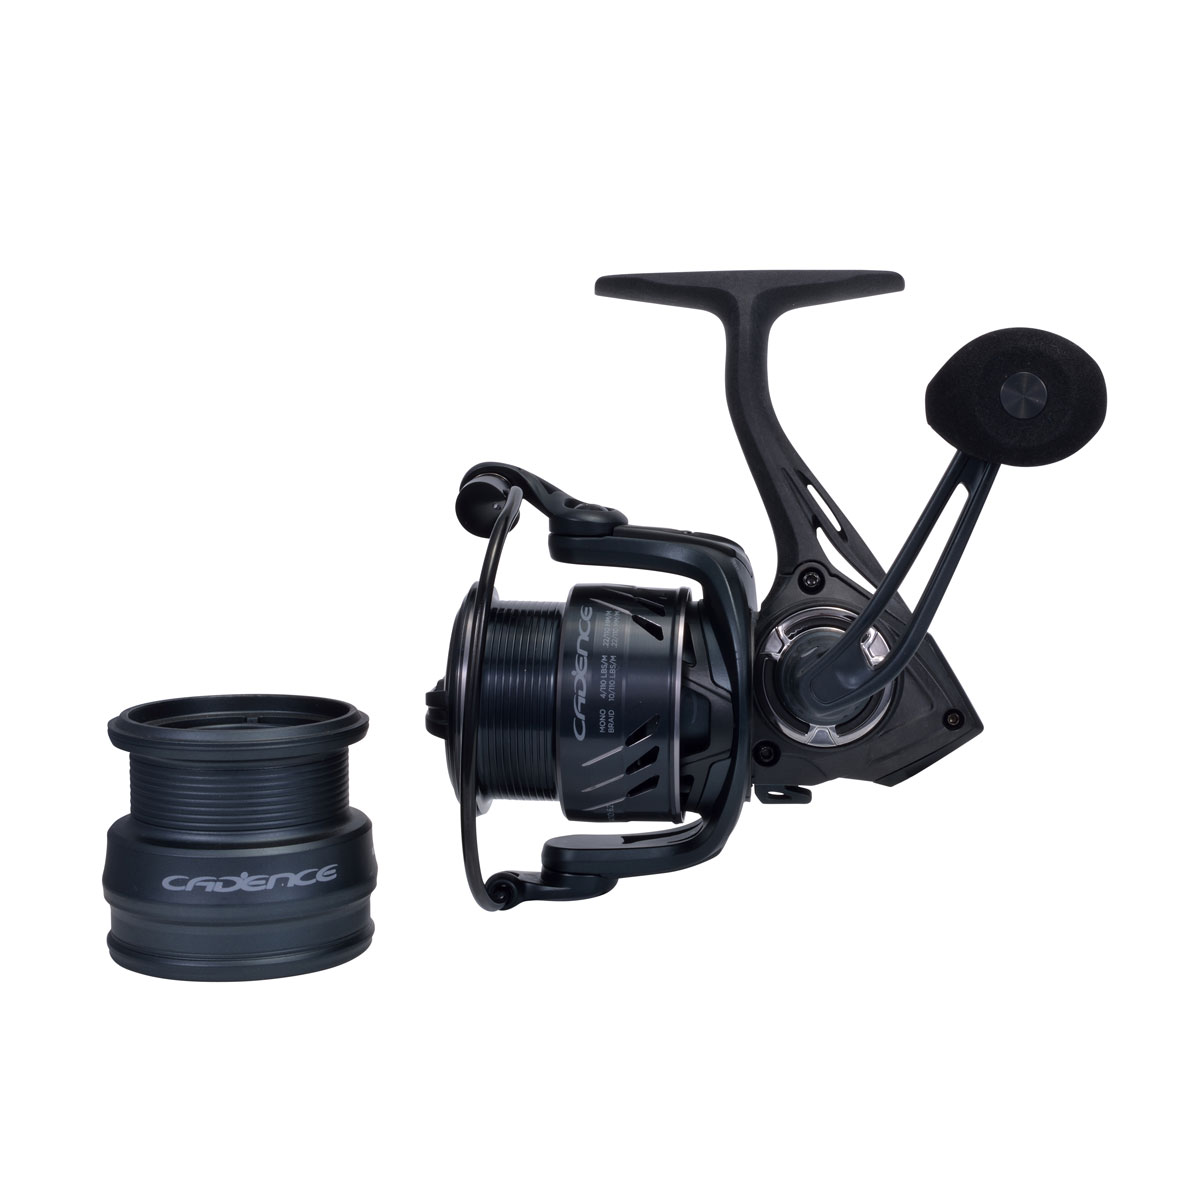 Cadence Cs4 Carbon Composite Lightweight Fixed Spool Match Fishing Reel 4lb  3000 for sale online